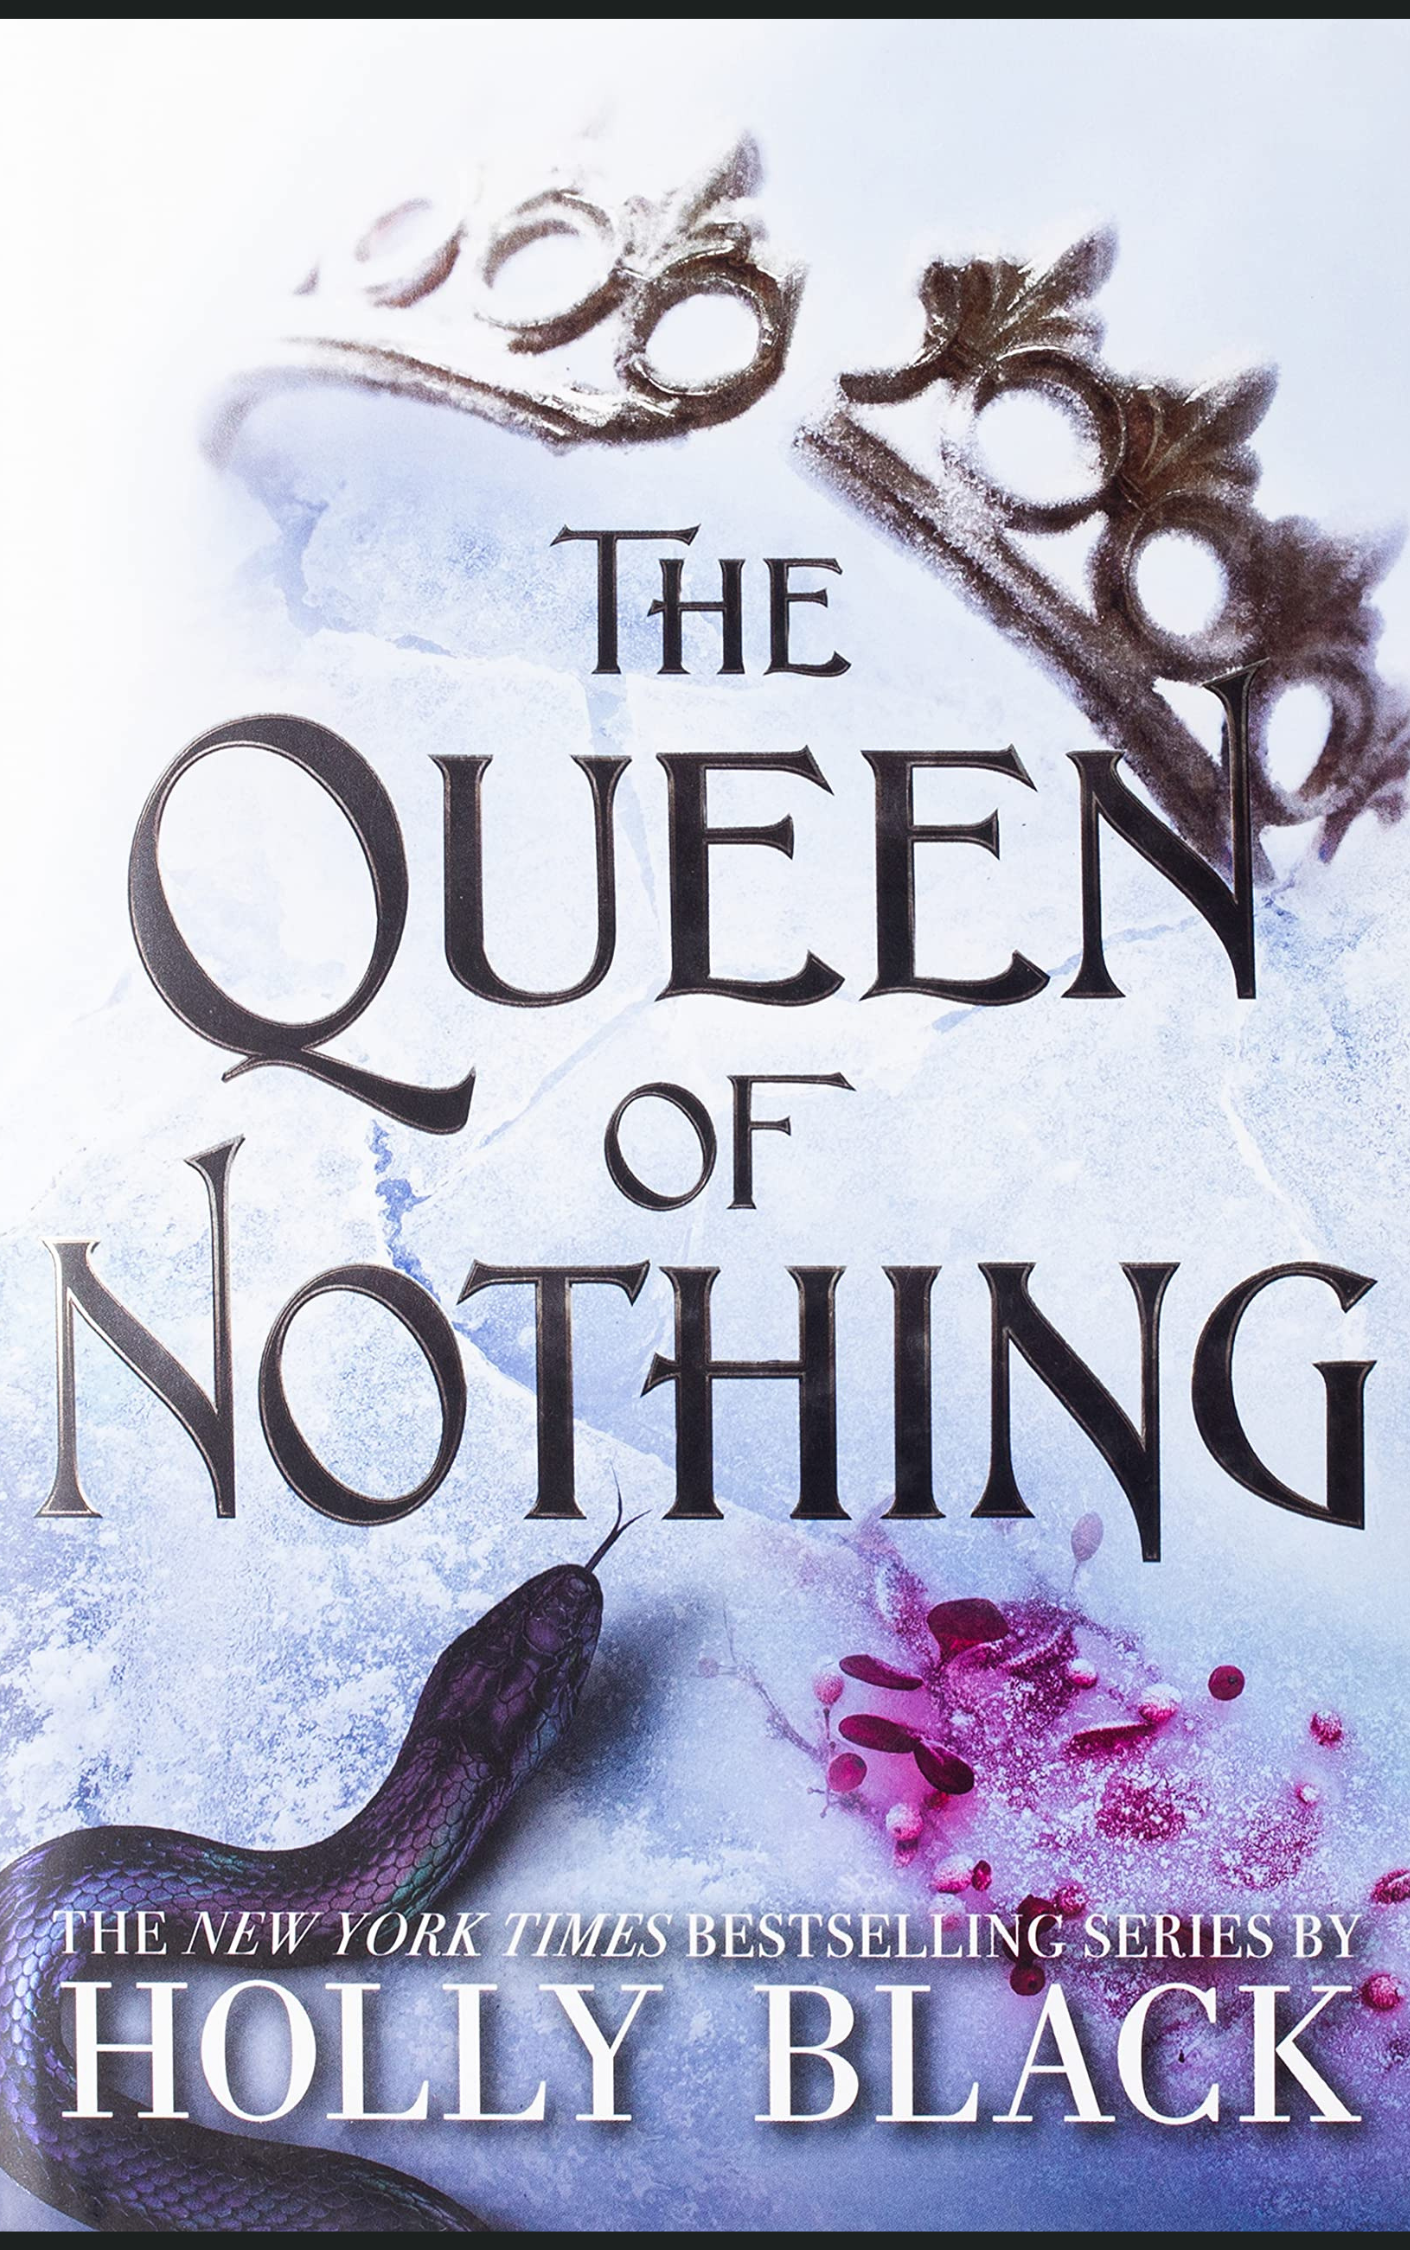 THE QUEEN OF NOTHING (THE FOLK OF THE AIR #3) BY HOLLY BLACK